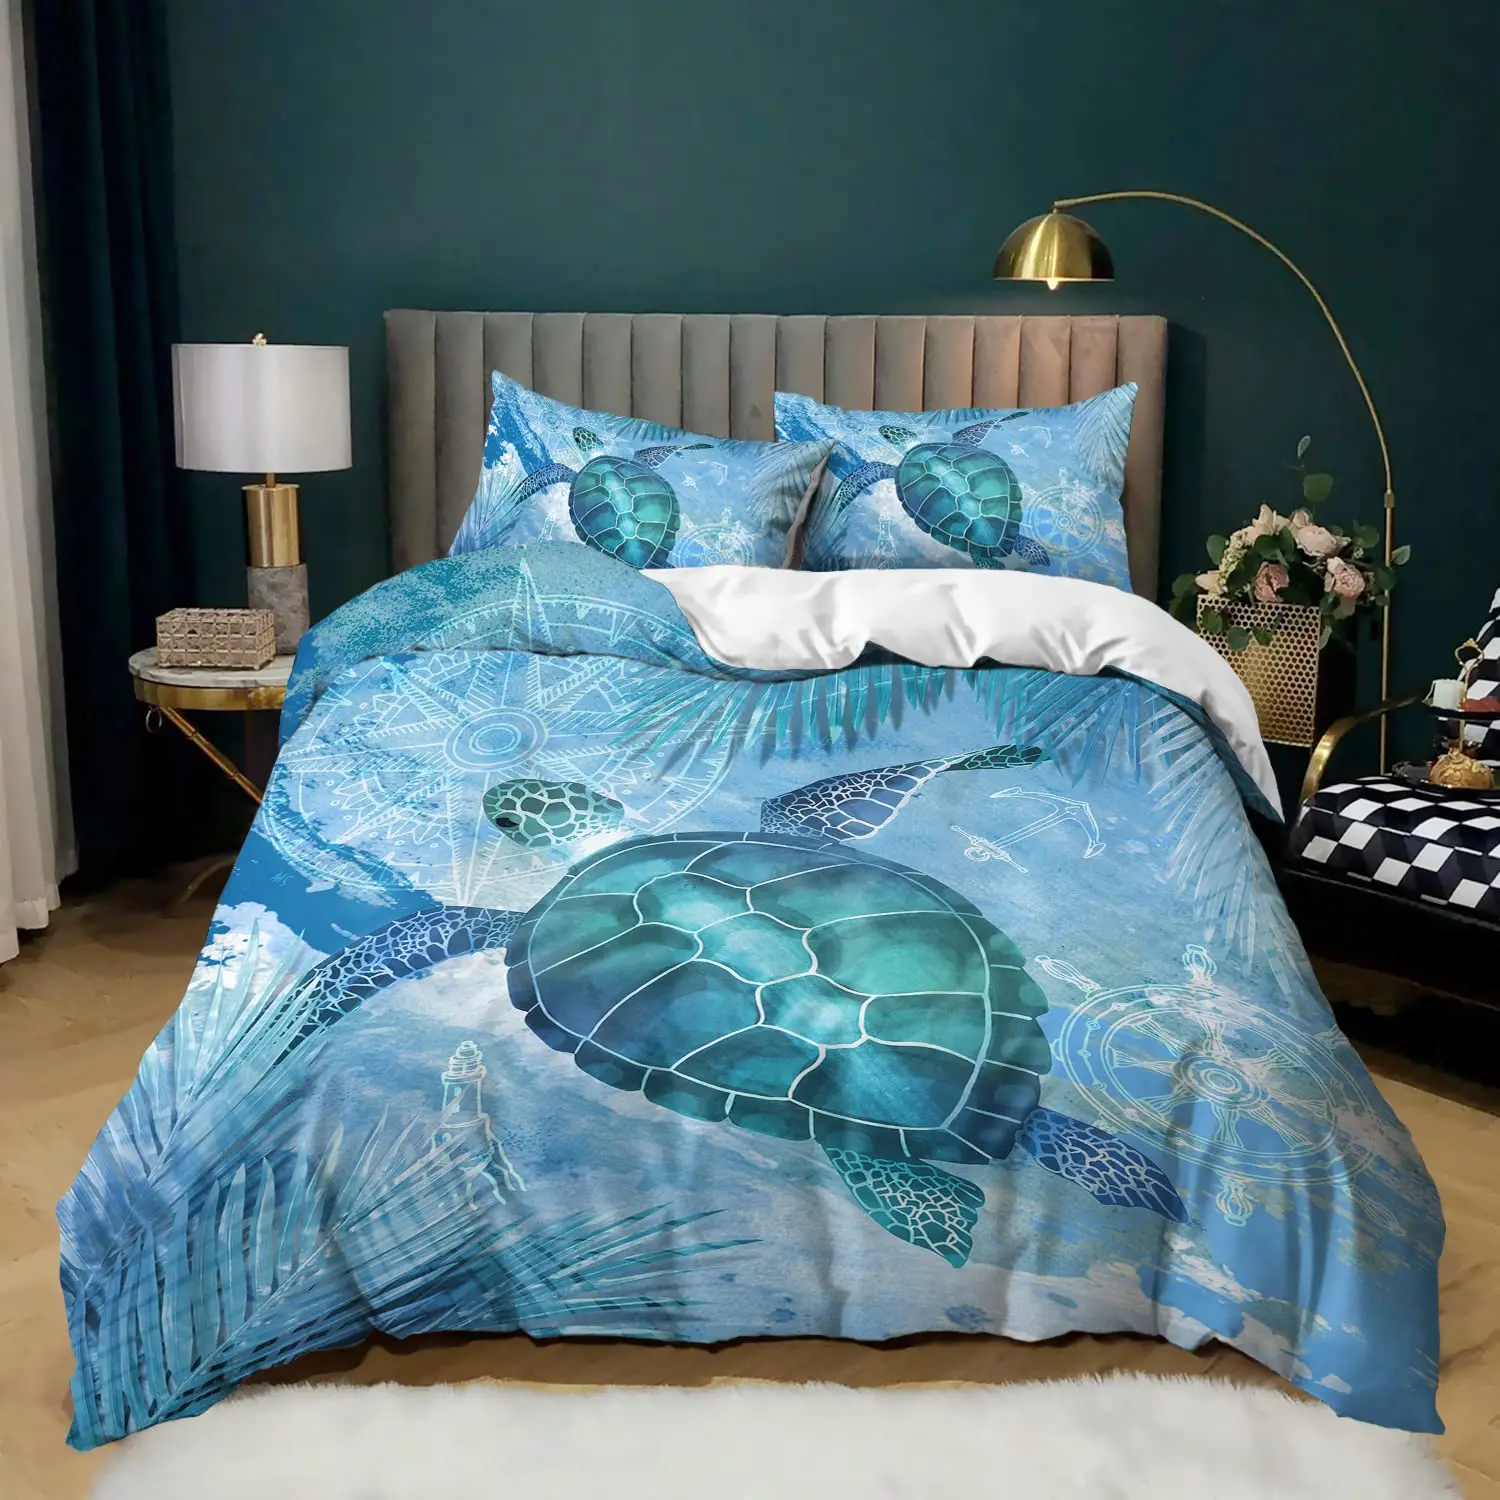 

Sea Turtle Bedding Set,Sea Turtle Duvet Cover Set King Size,Ocean Turtle Themed Comforter Cover for Teens Boys and Girls 3 Piece